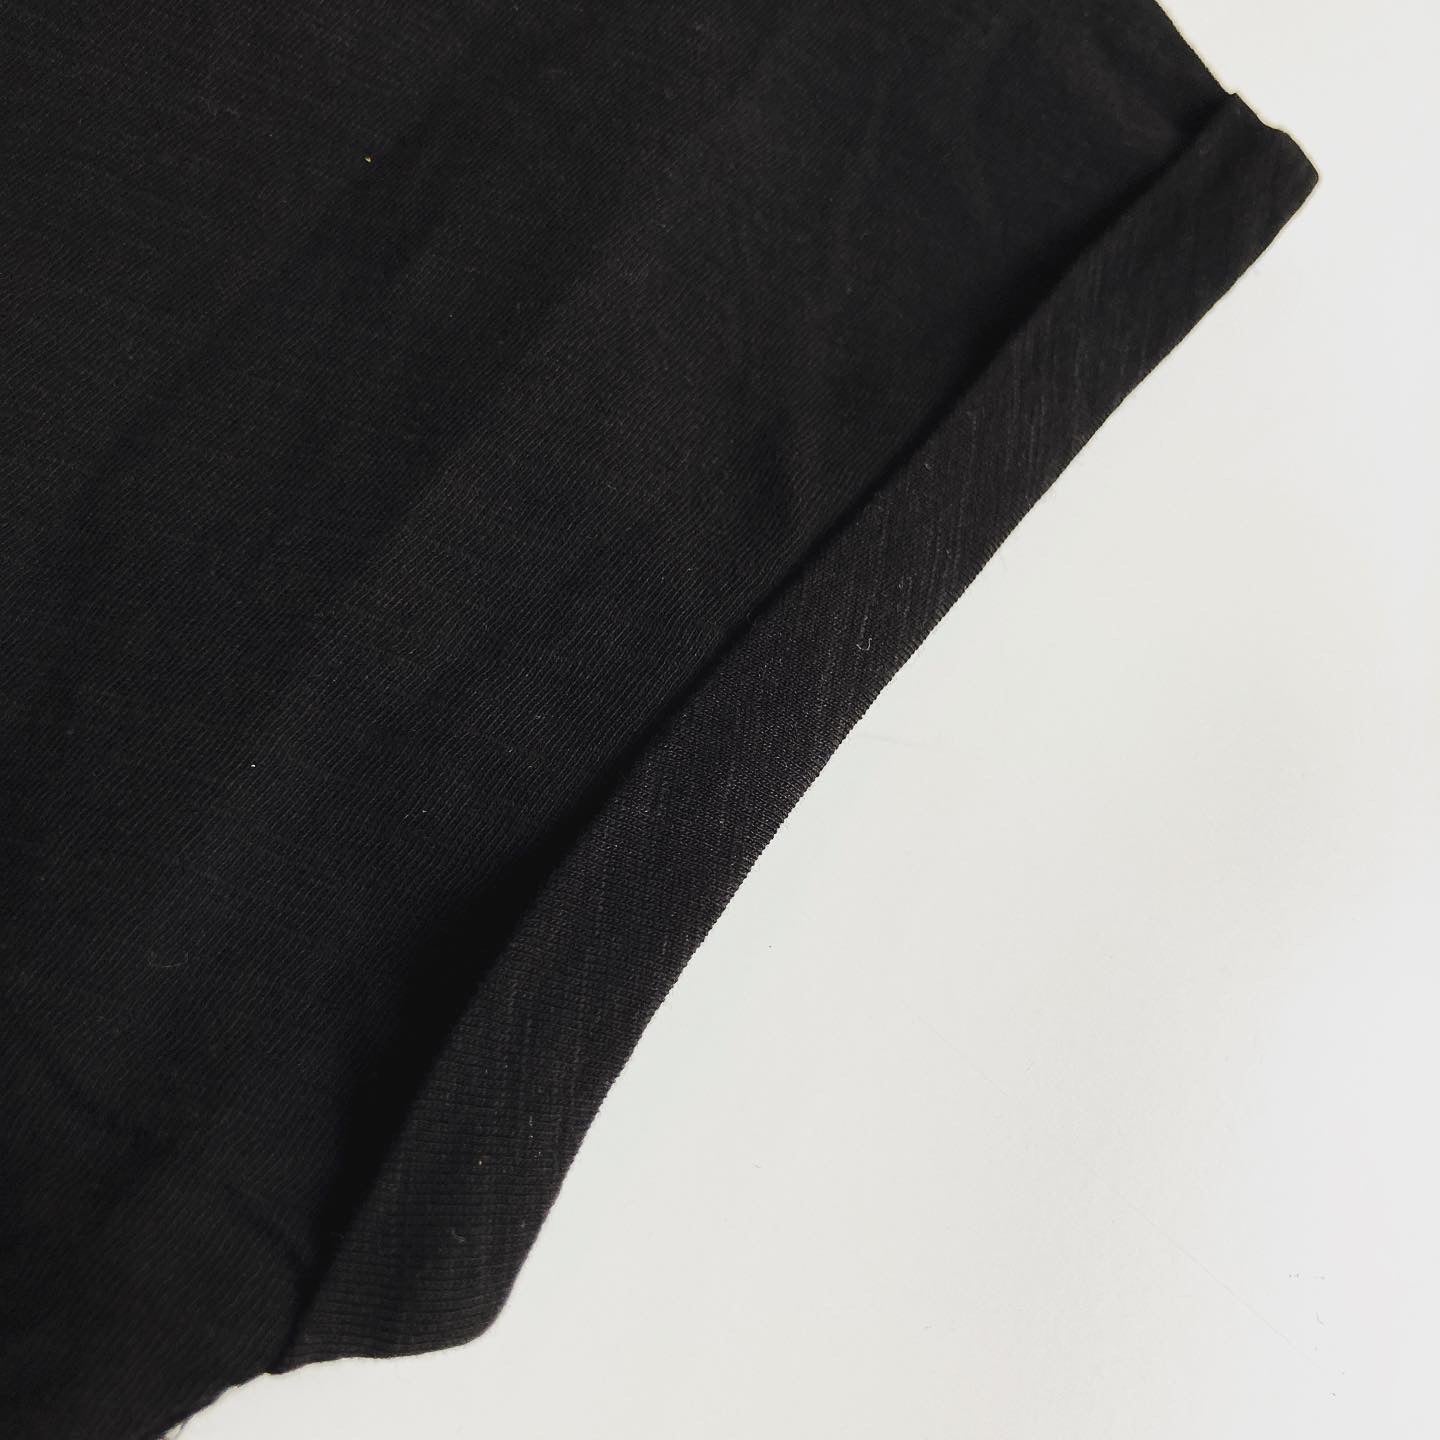 Black shirt with roll up sleeves